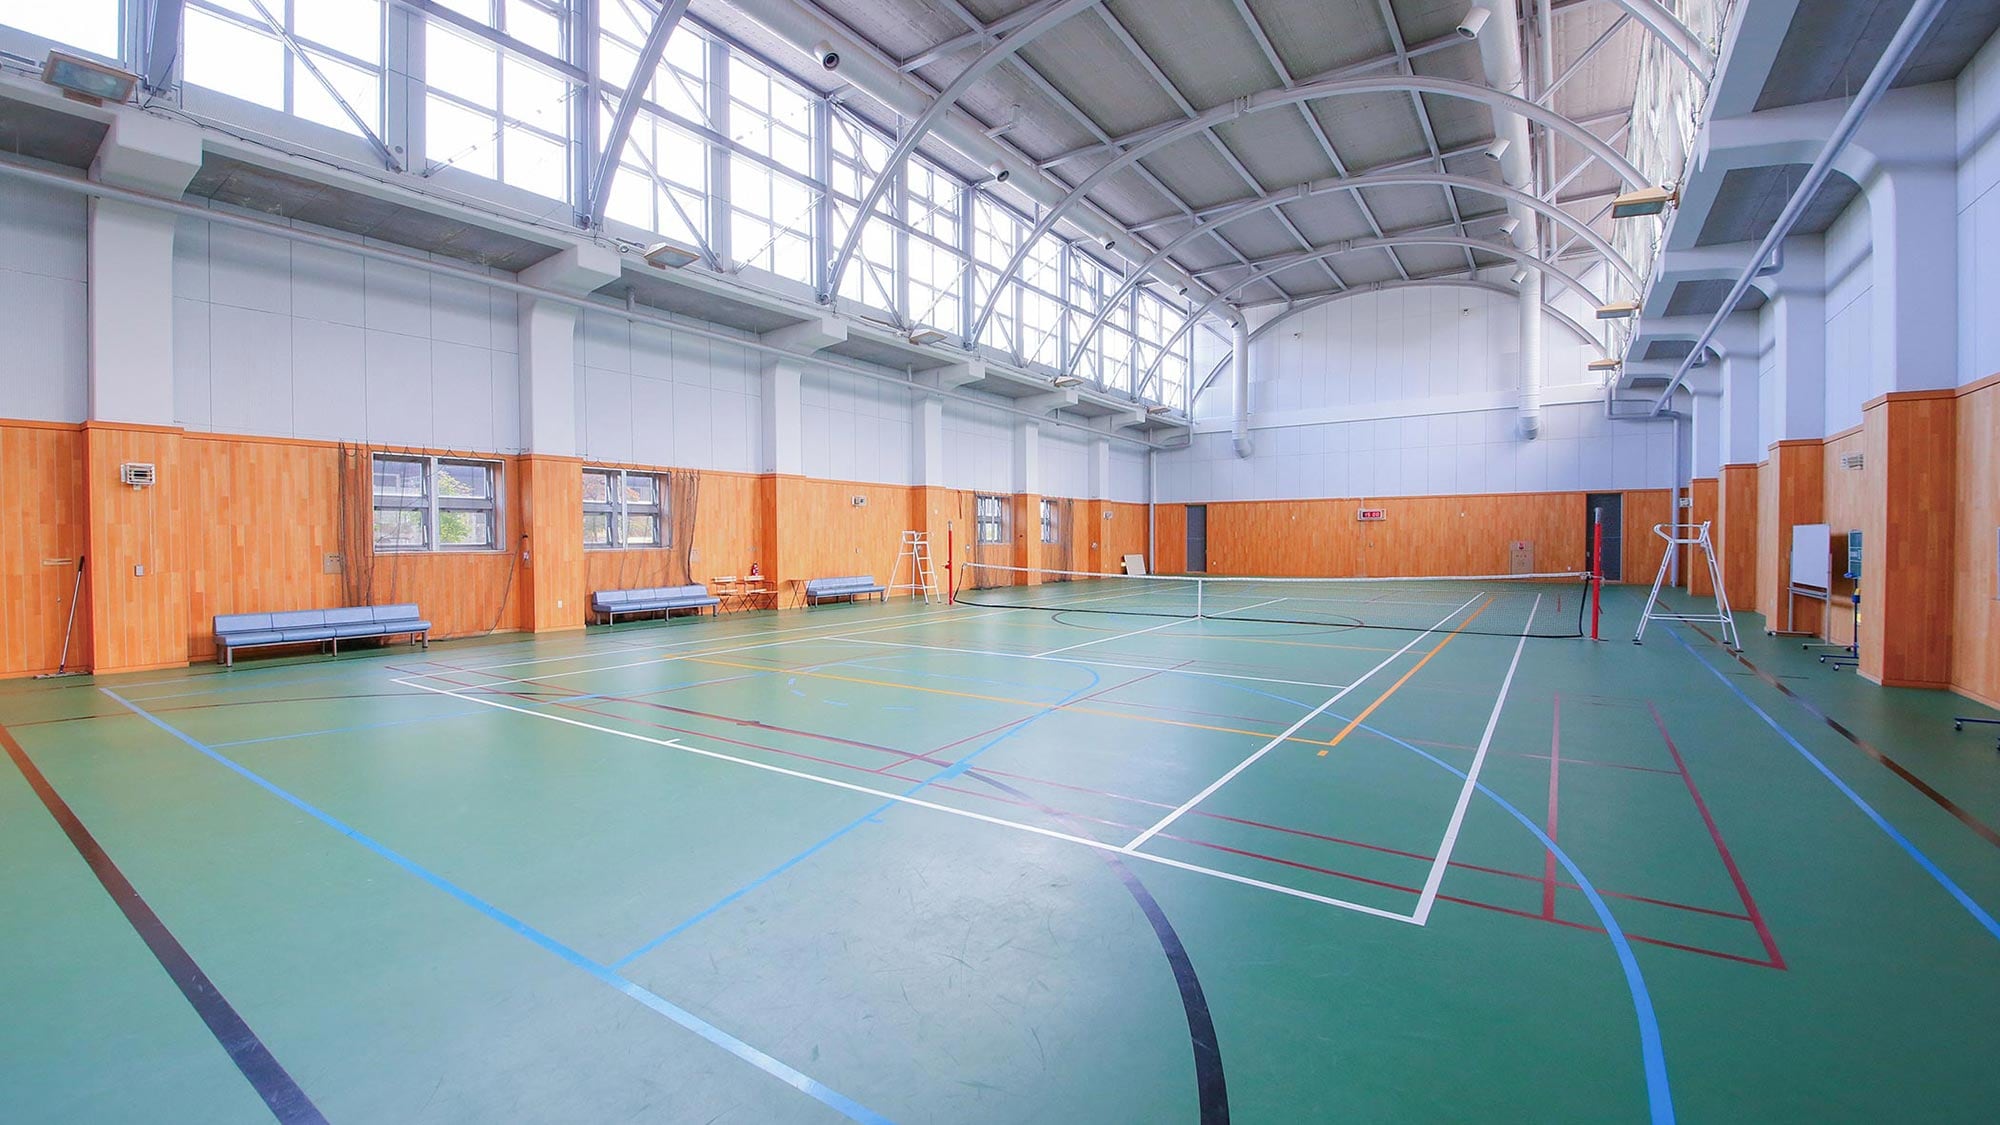 There is an indoor free court for tennis and basketball. You can use it for 1,000 yen (excluding tax) per hour.